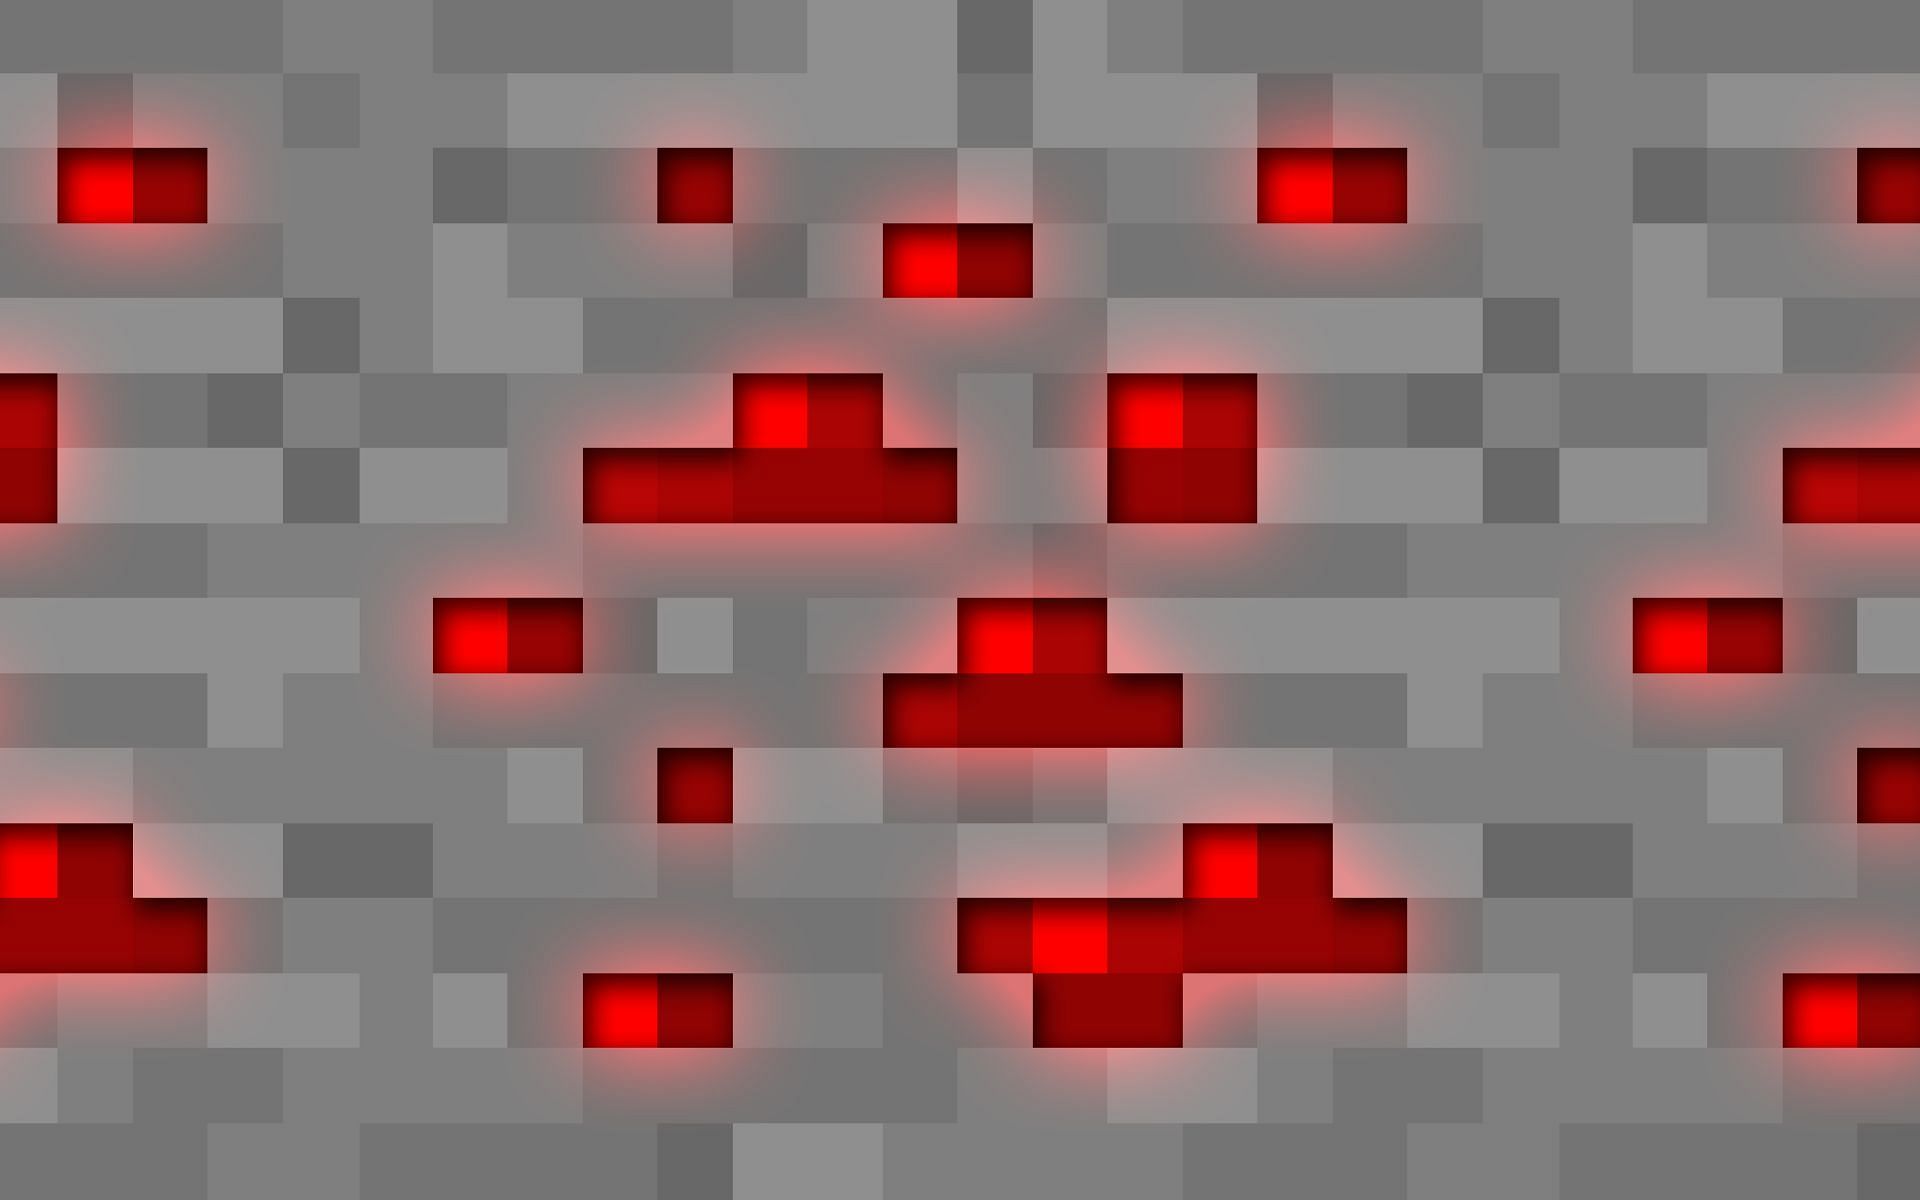 Randomizer circuits are just one thing players can build with redstone. (Image via Minecraft.)